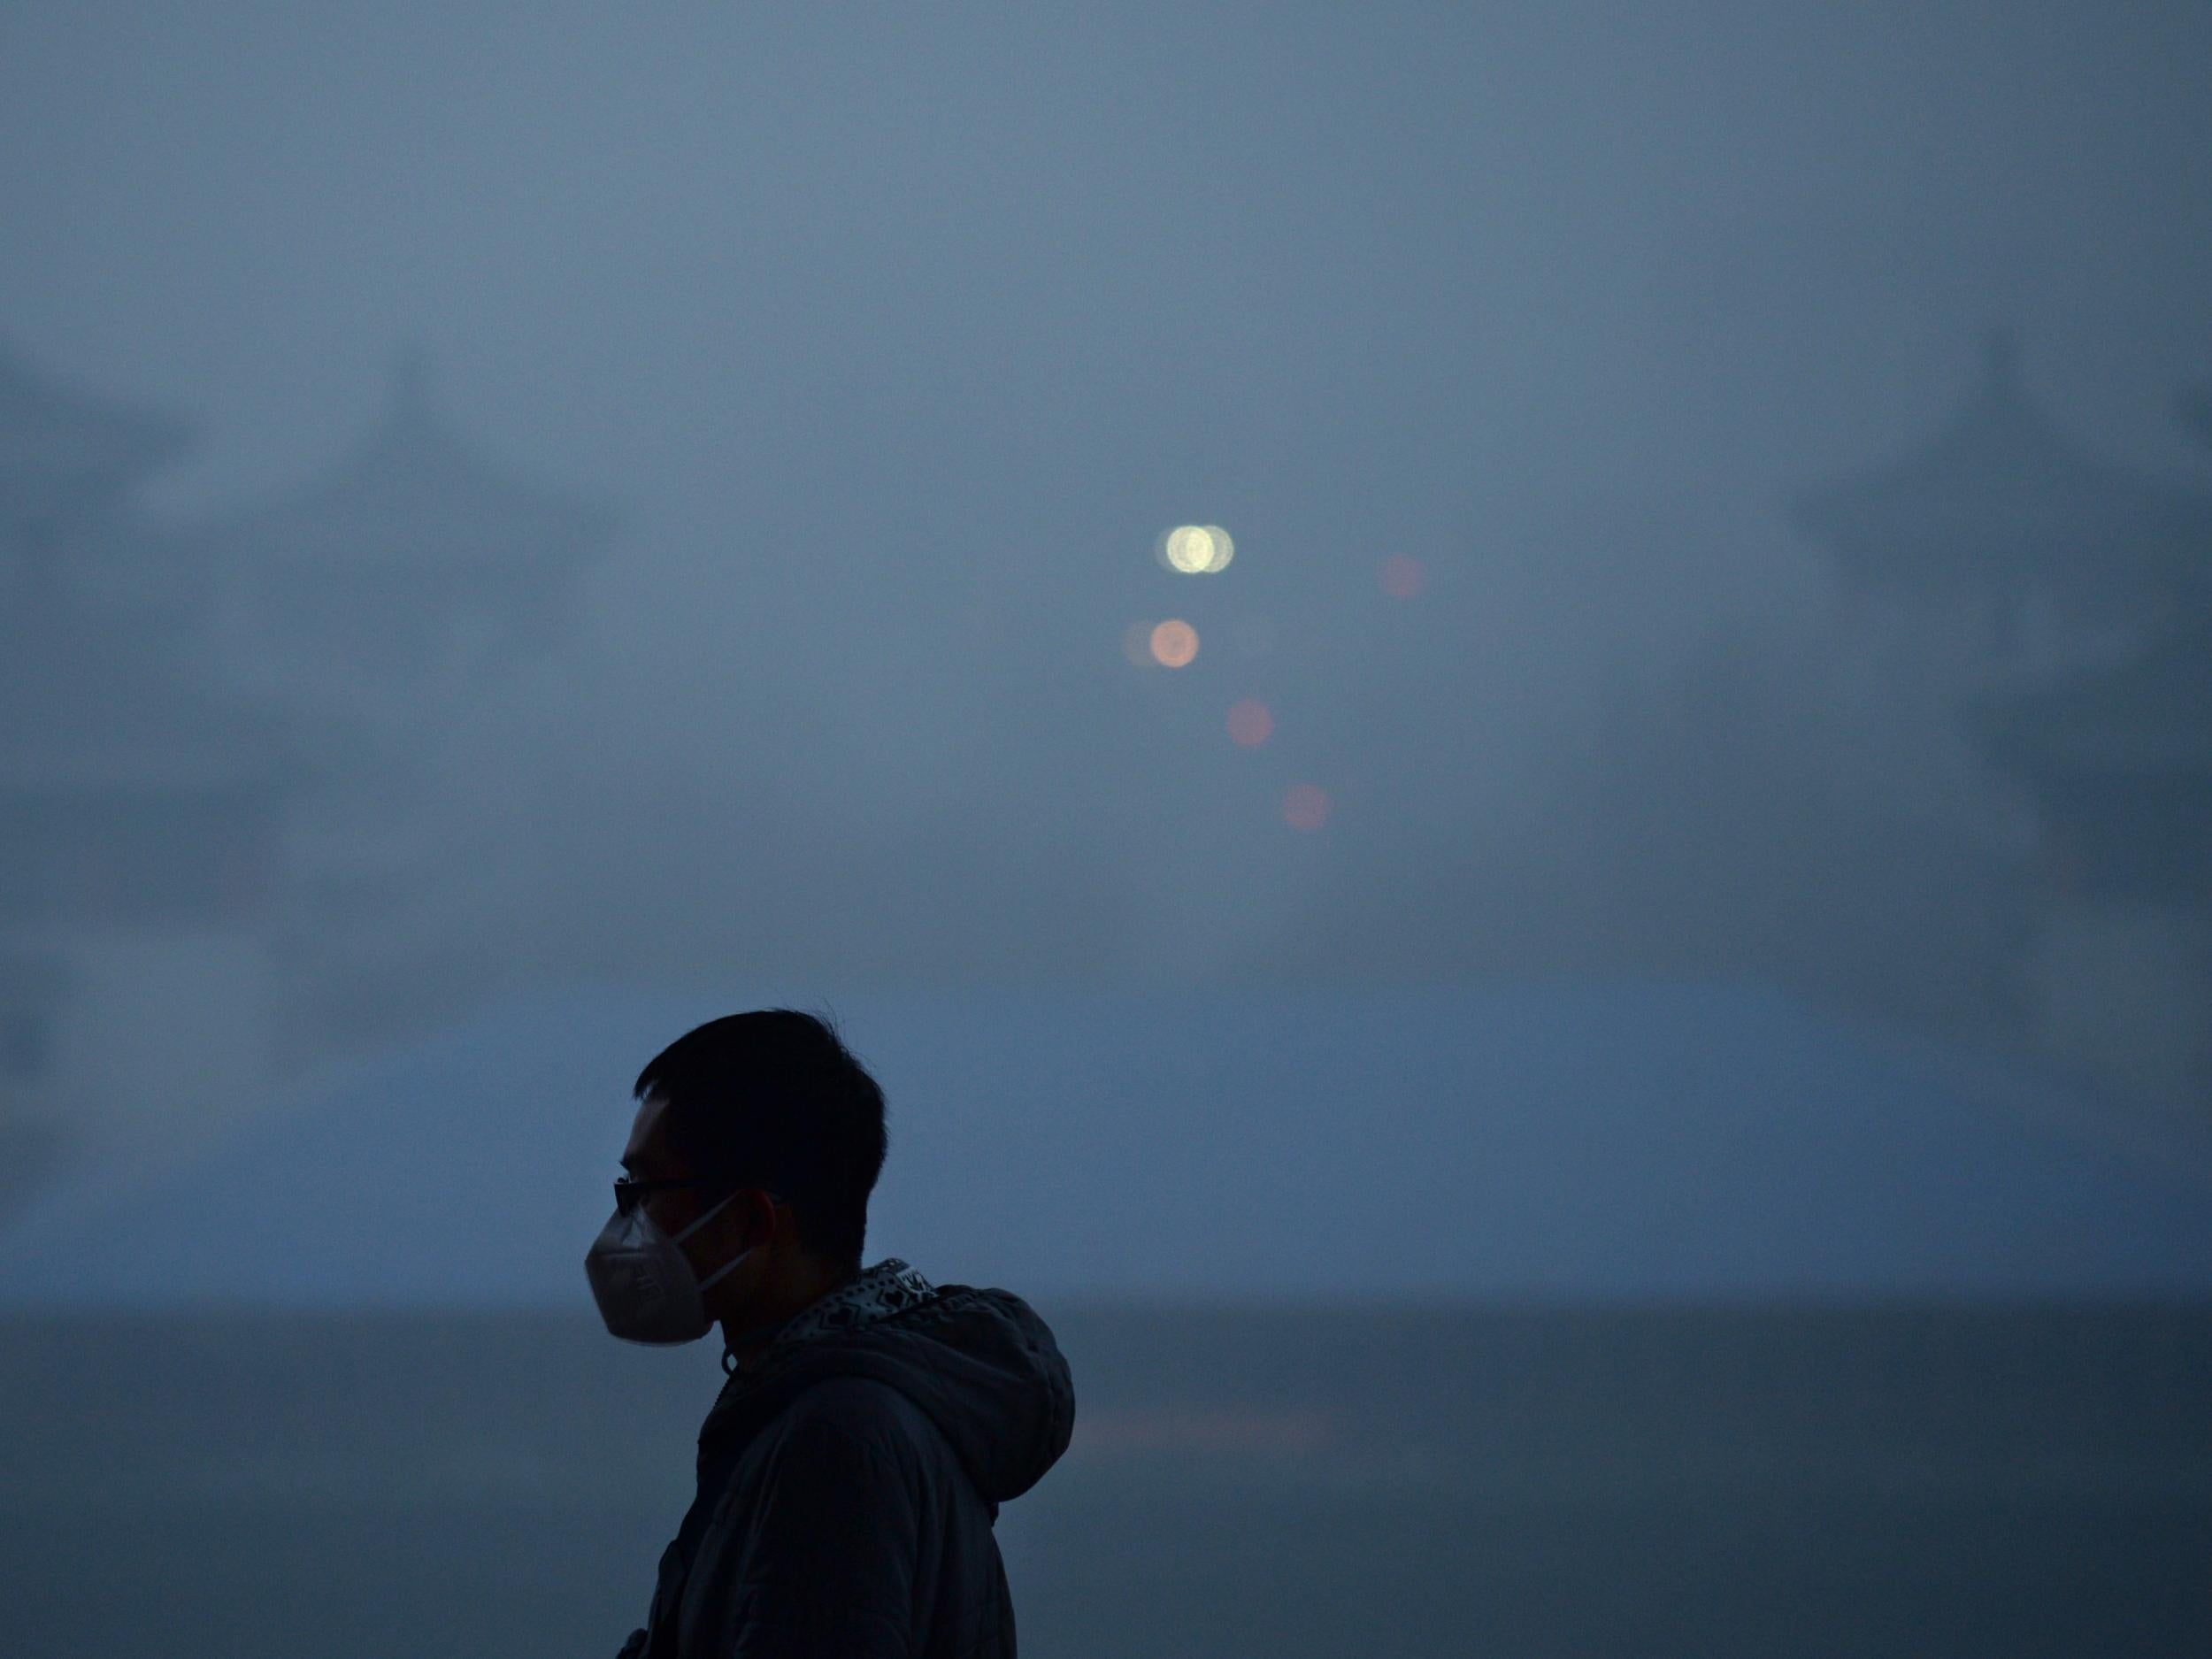 Ozone is a key ingredient in the smog that has enveloped so many Chinese cities